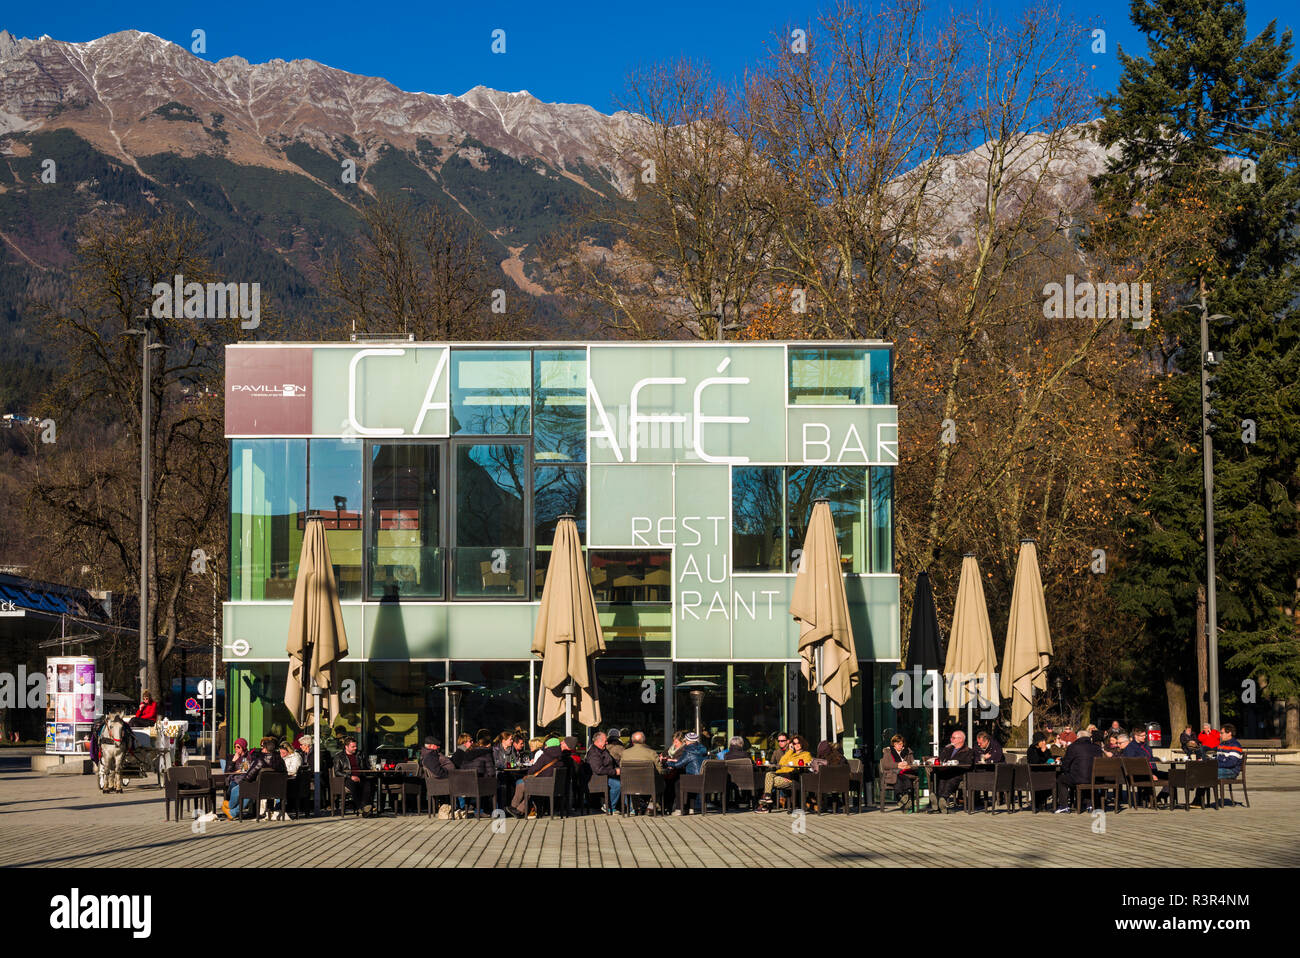 Austria, Tyrol, Innsbruck, Pavilion Cafe by the Tyrolean State Theatre (Editorial Use Only) Stock Photo